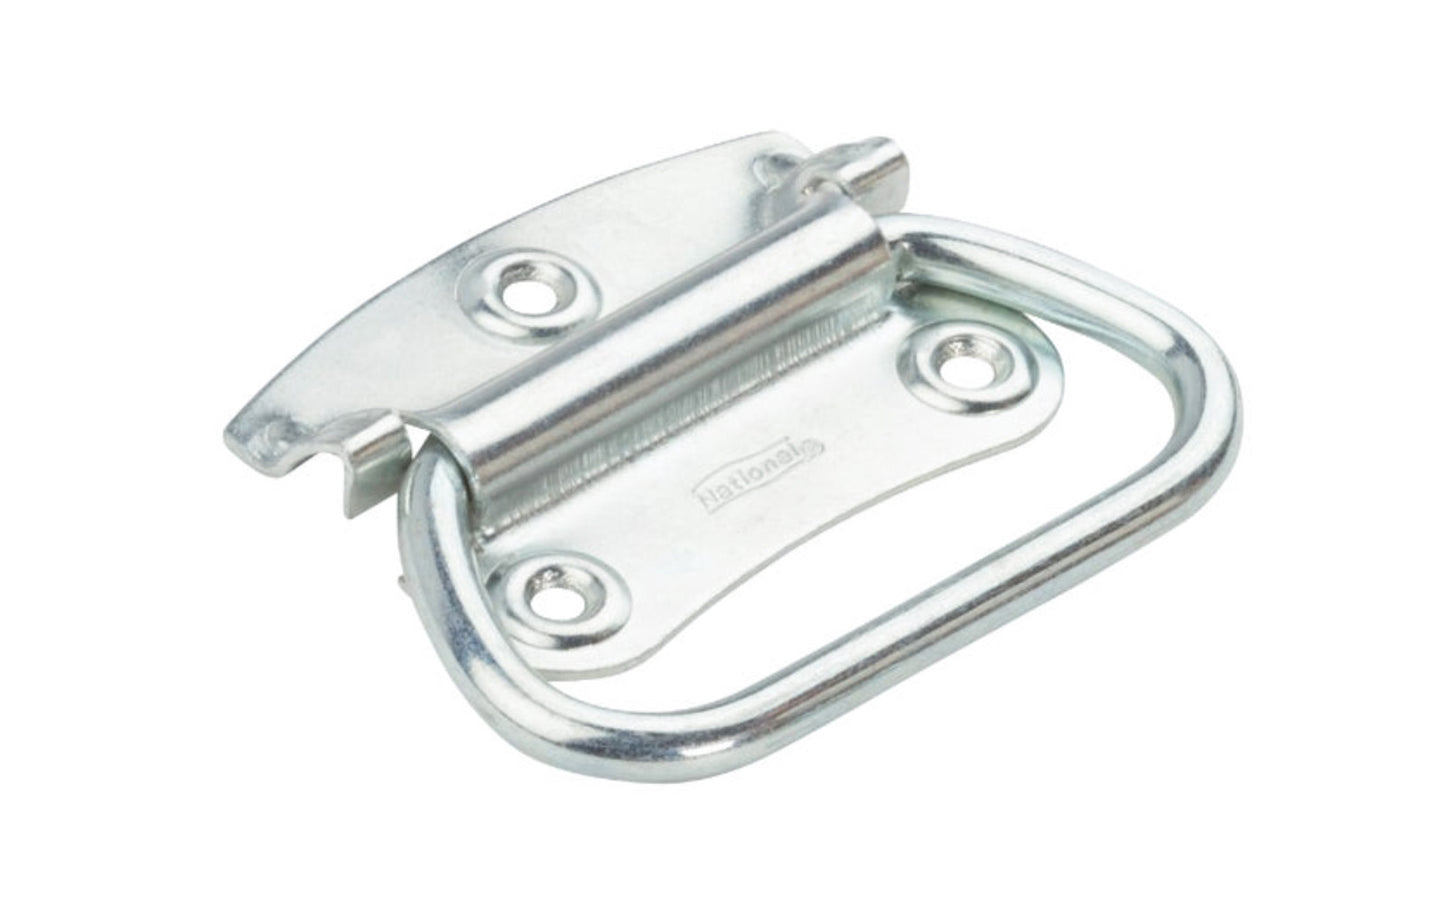 This 2-3/4" chest handle is made of cold rolled steel. Designed for smaller chests & boxes. Zinc-plated steel. Sold as one handle in pack. National Hardware Model No. N203-760. 038613203761. 2-3/4" Zinc Plated Steel Chest Handle